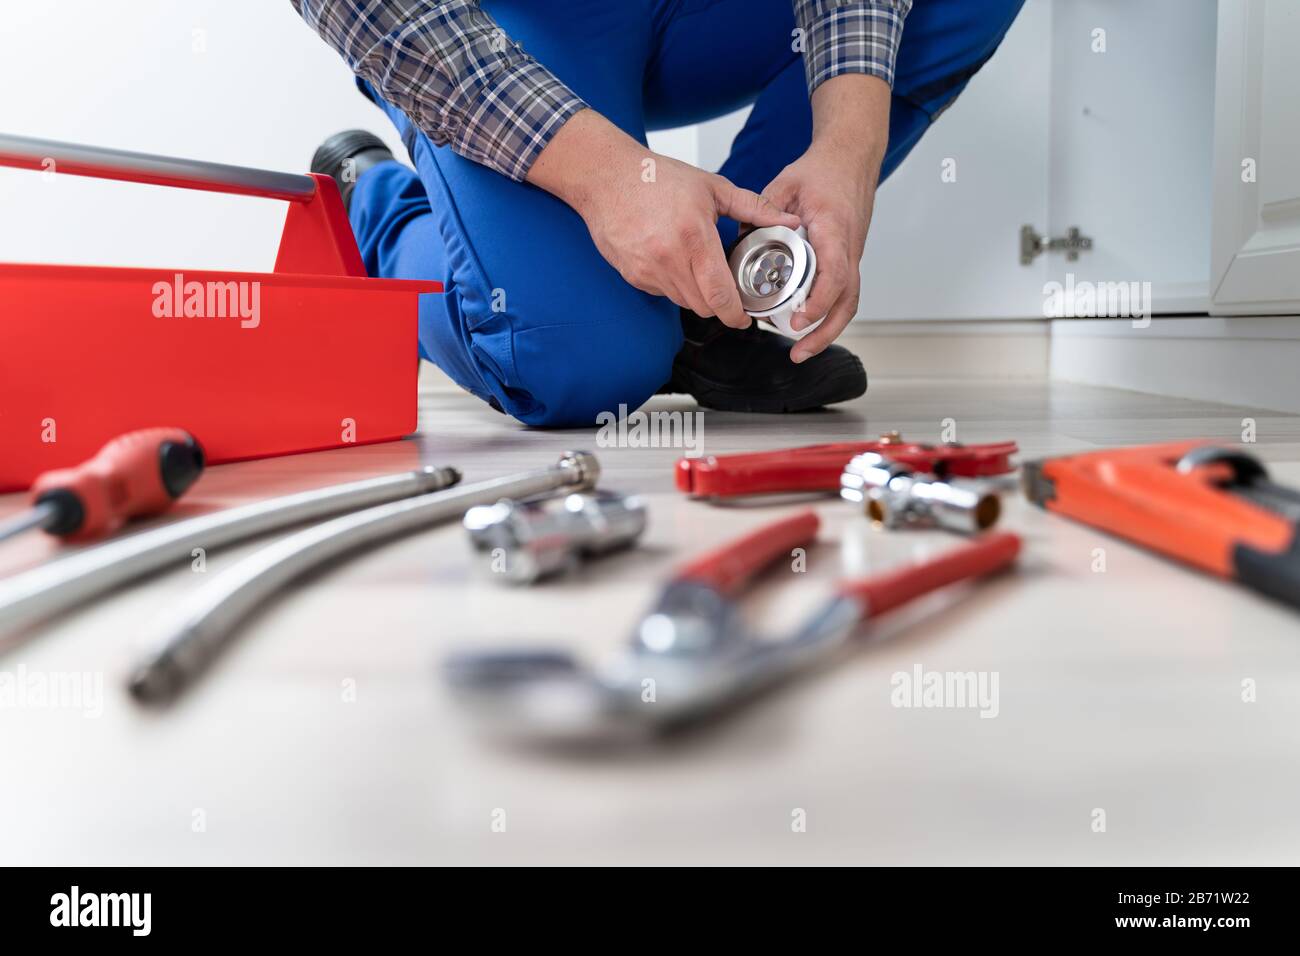 Male Plumber In Overall Fixing Kitchen Sink Pipe Stock Photo